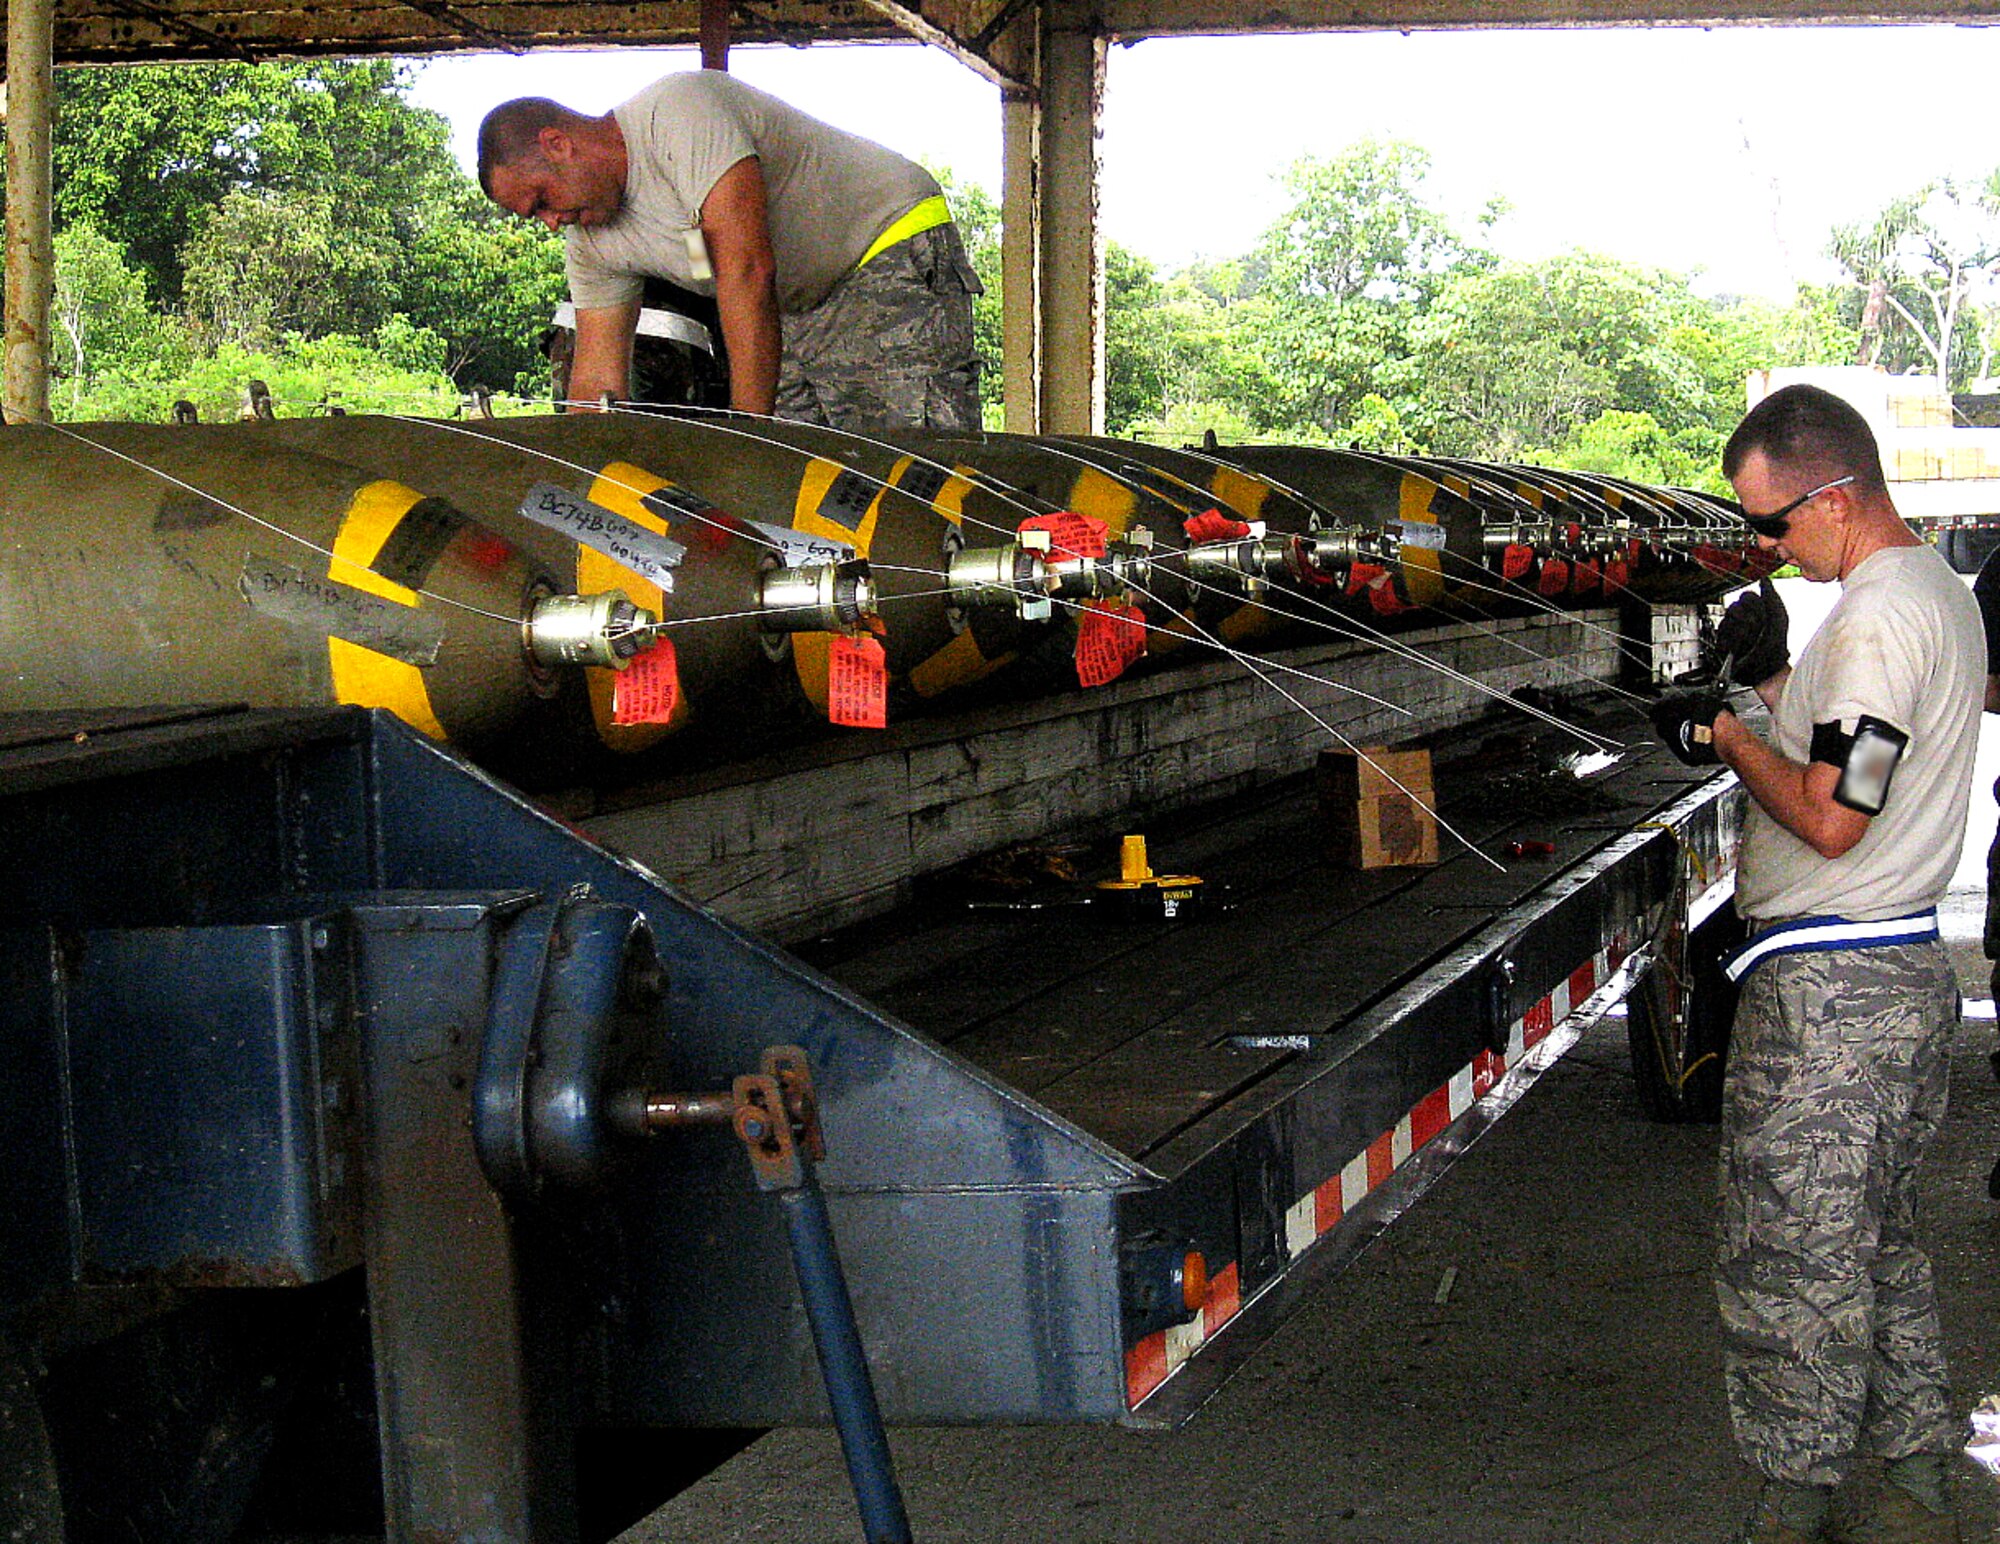 Airmen  from the 36th Munitions Squadron build 117M bombs at the at 9105 Pad during the Ammunition Production Exercise (CAPEX) that took place here July 28 through Aug. 2. The CAPEX continues to be the best tool available for all levels of command within the logistics community to evaluate munitions combat readiness, training requirements, and Combat Munitions Plan adequacy. (Courtsey photo)

